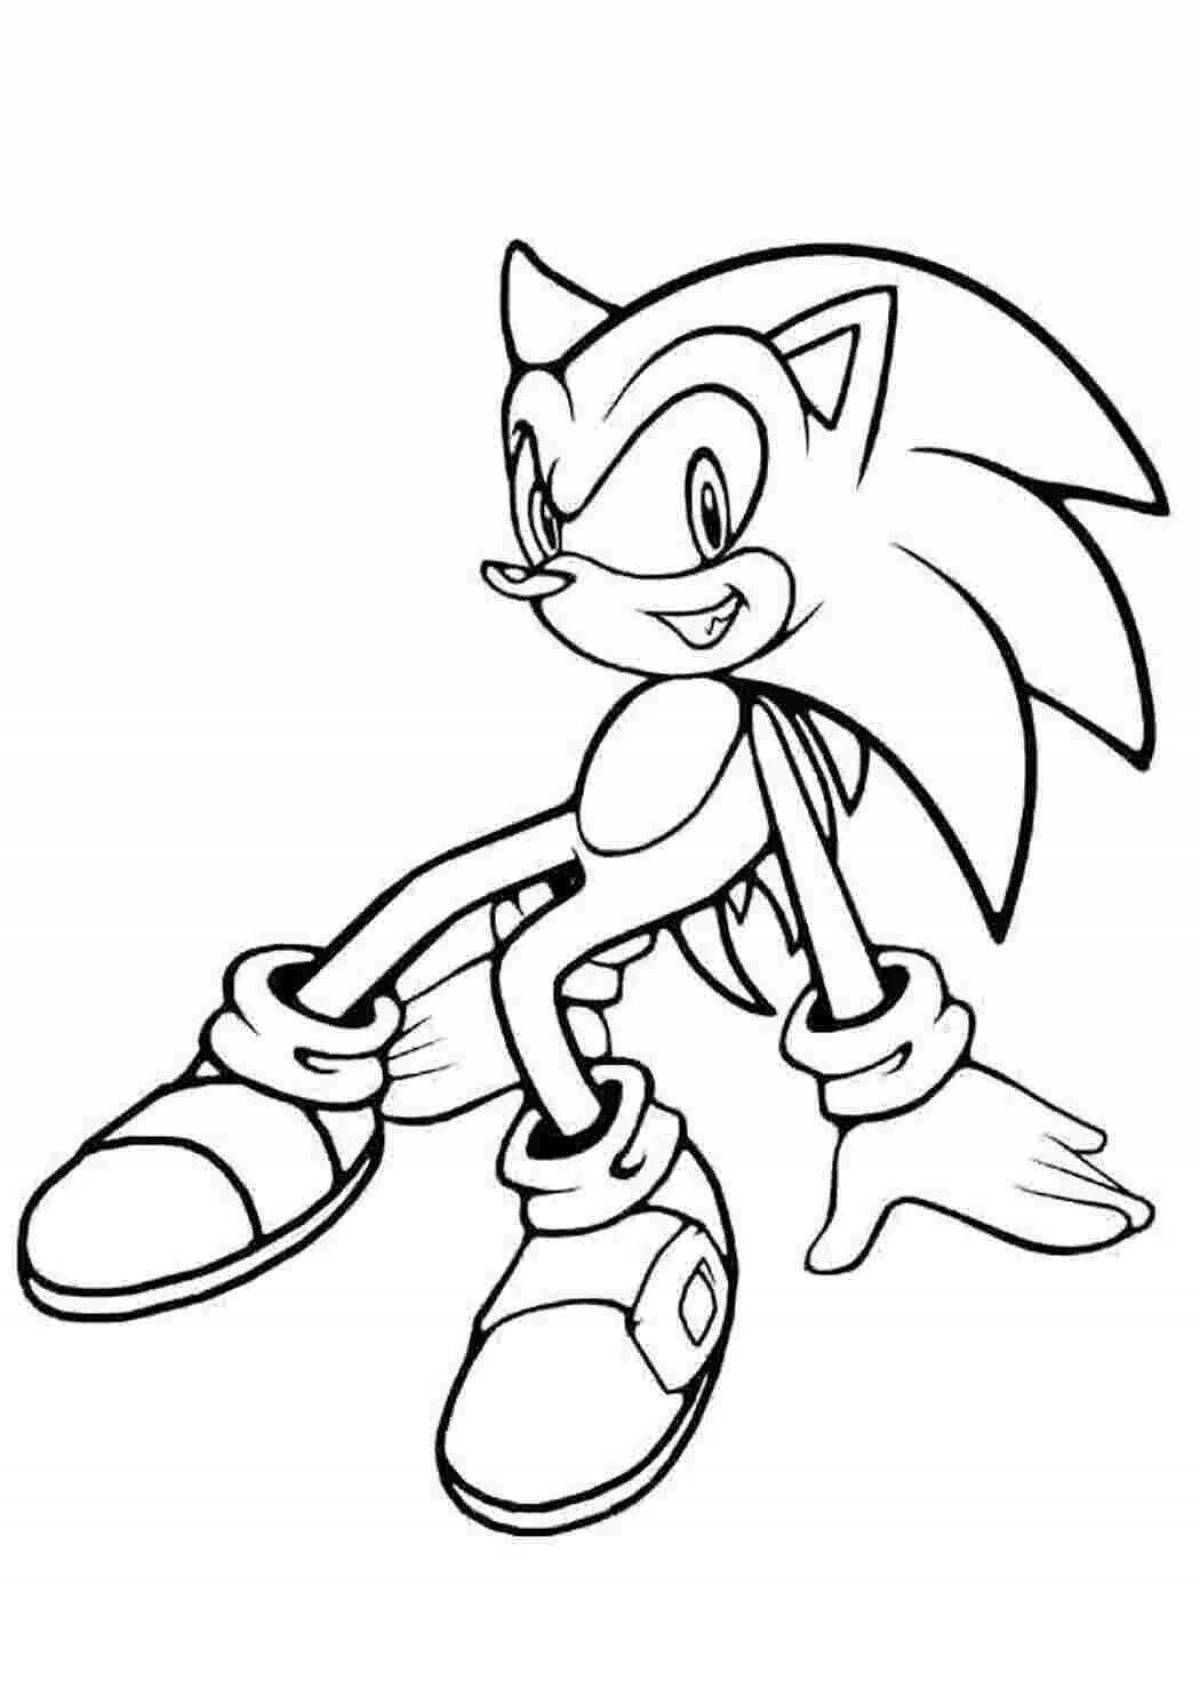 Amazing sonic theos coloring book